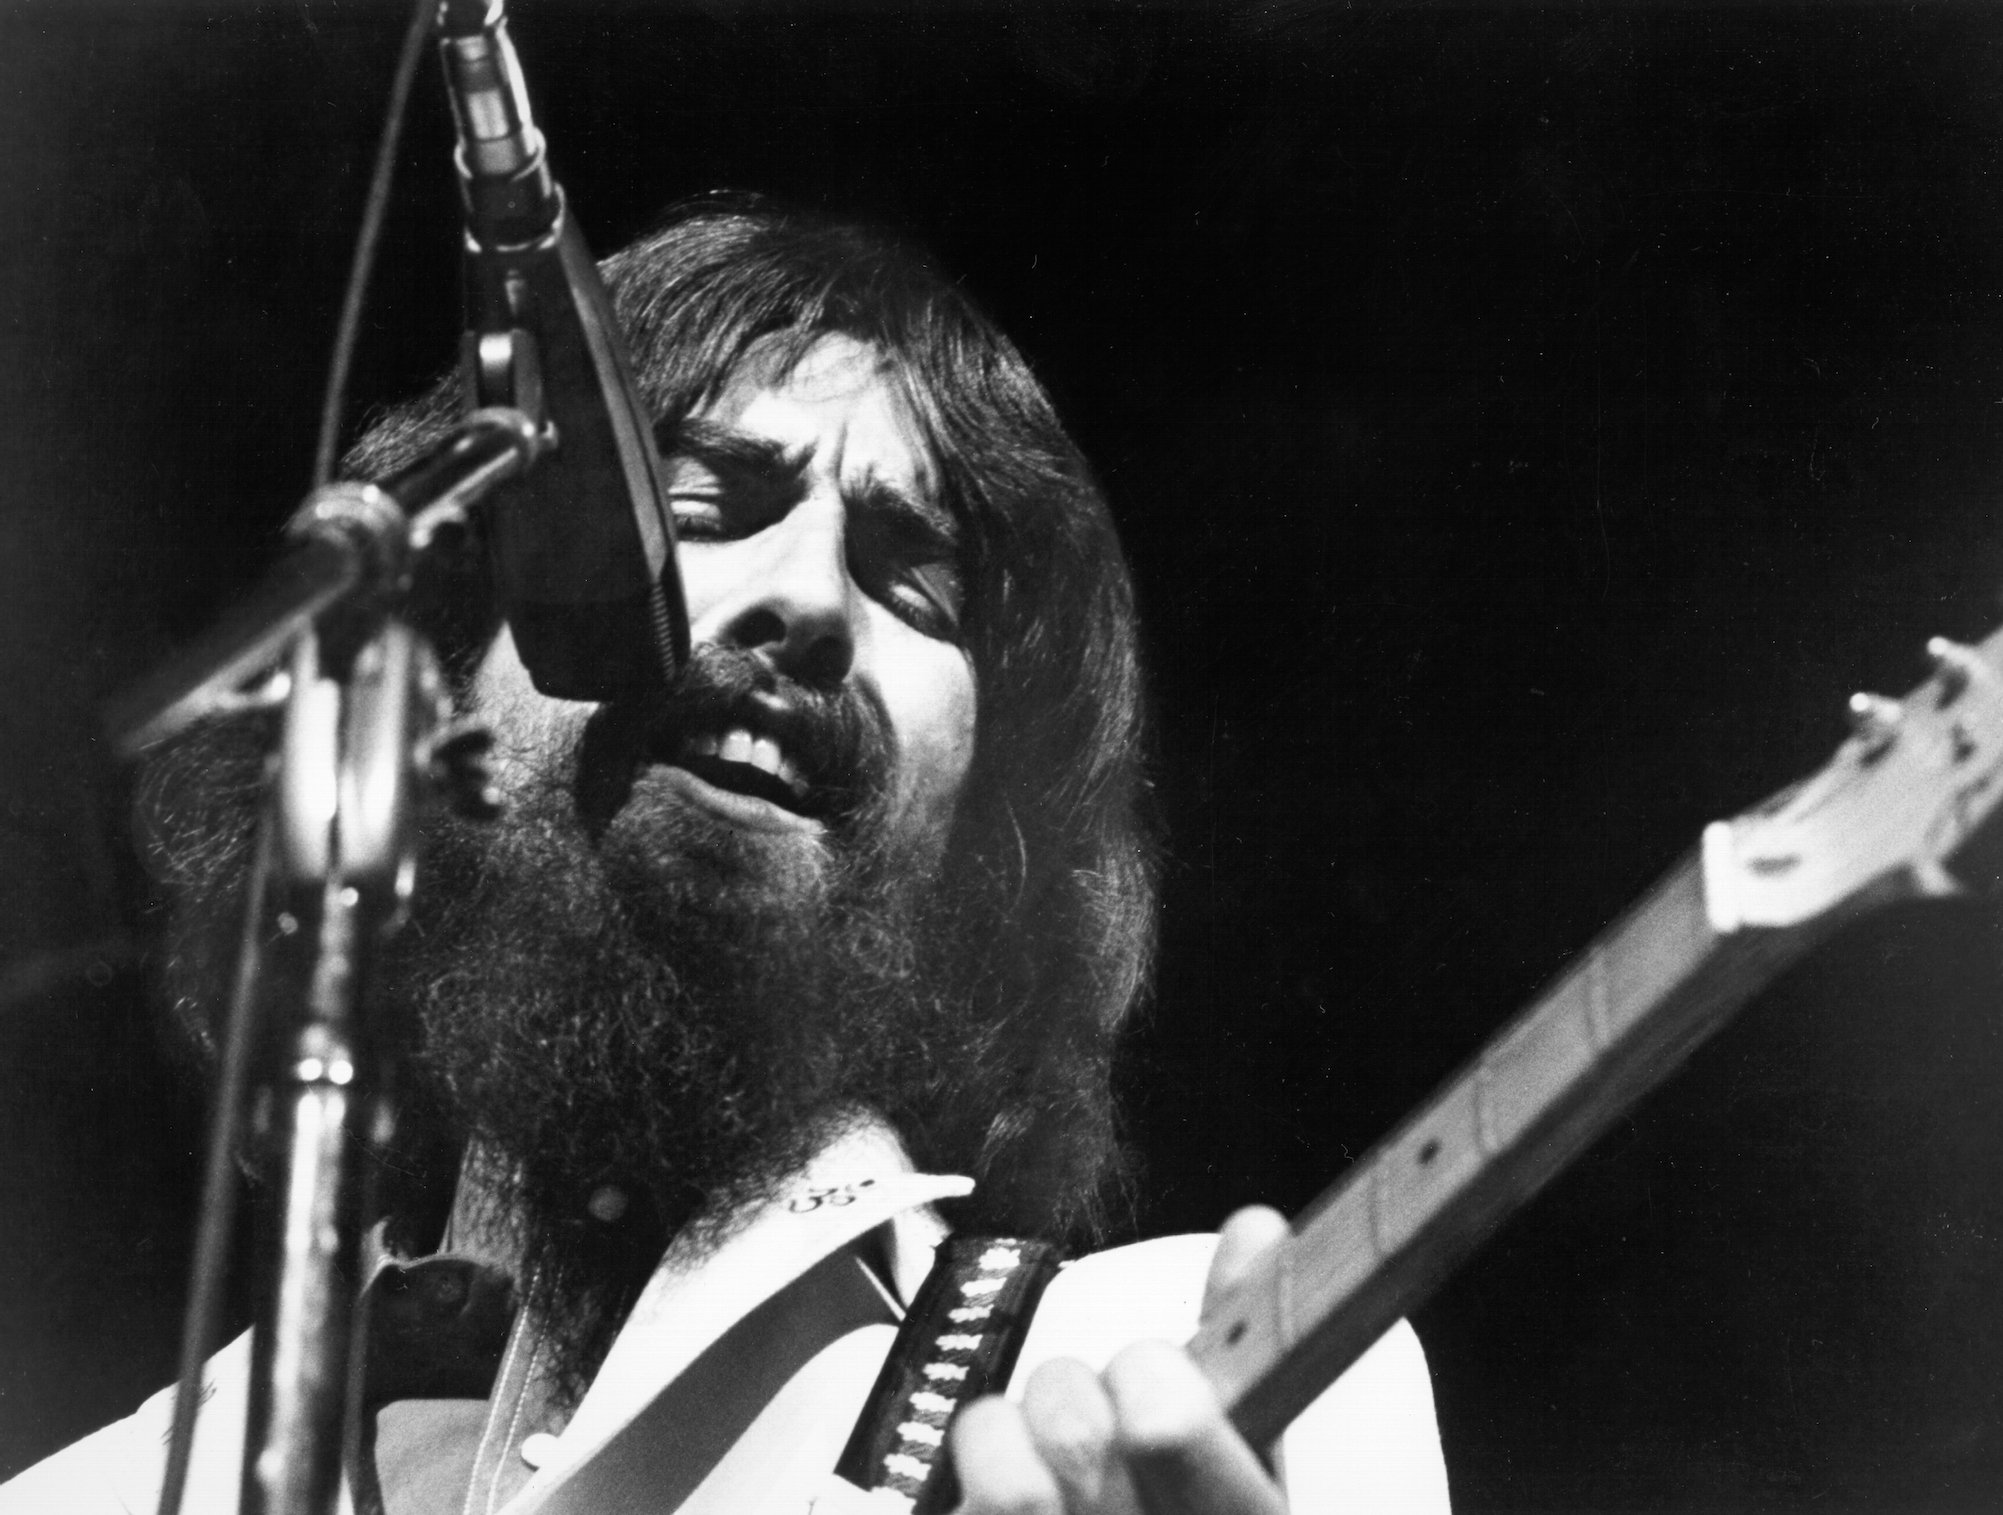 George Harrison performs at the Concert For Bangladesh at Madison Square Garden in New York City in 1971